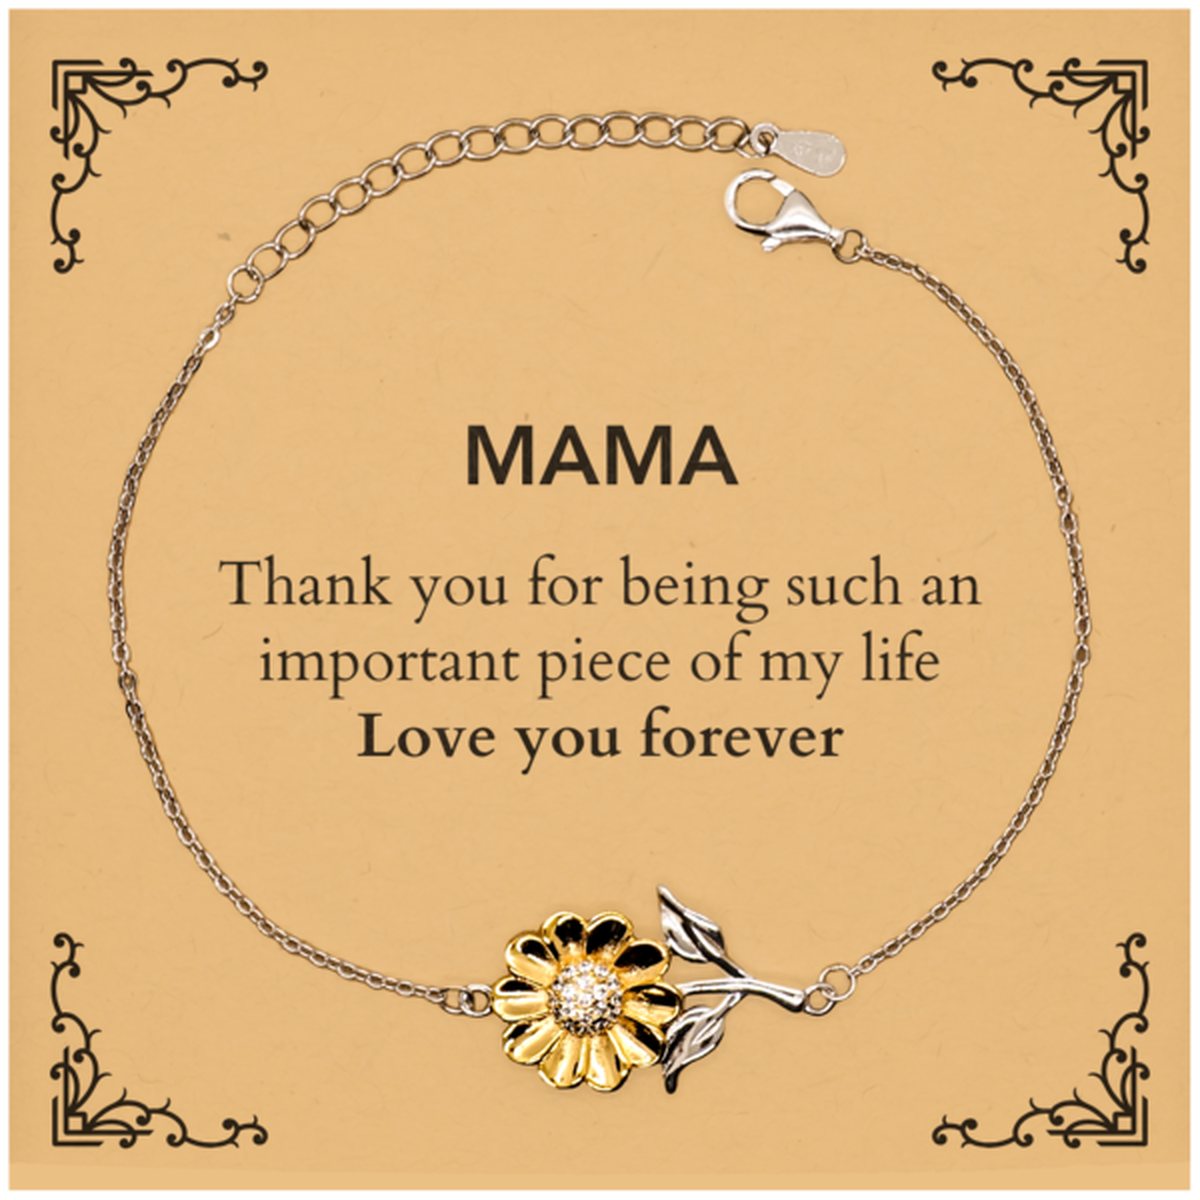 Appropriate Mama Sunflower Bracelet Epic Birthday Gifts for Mama Thank you for being such an important piece of my life Mama Christmas Mothers Fathers Day